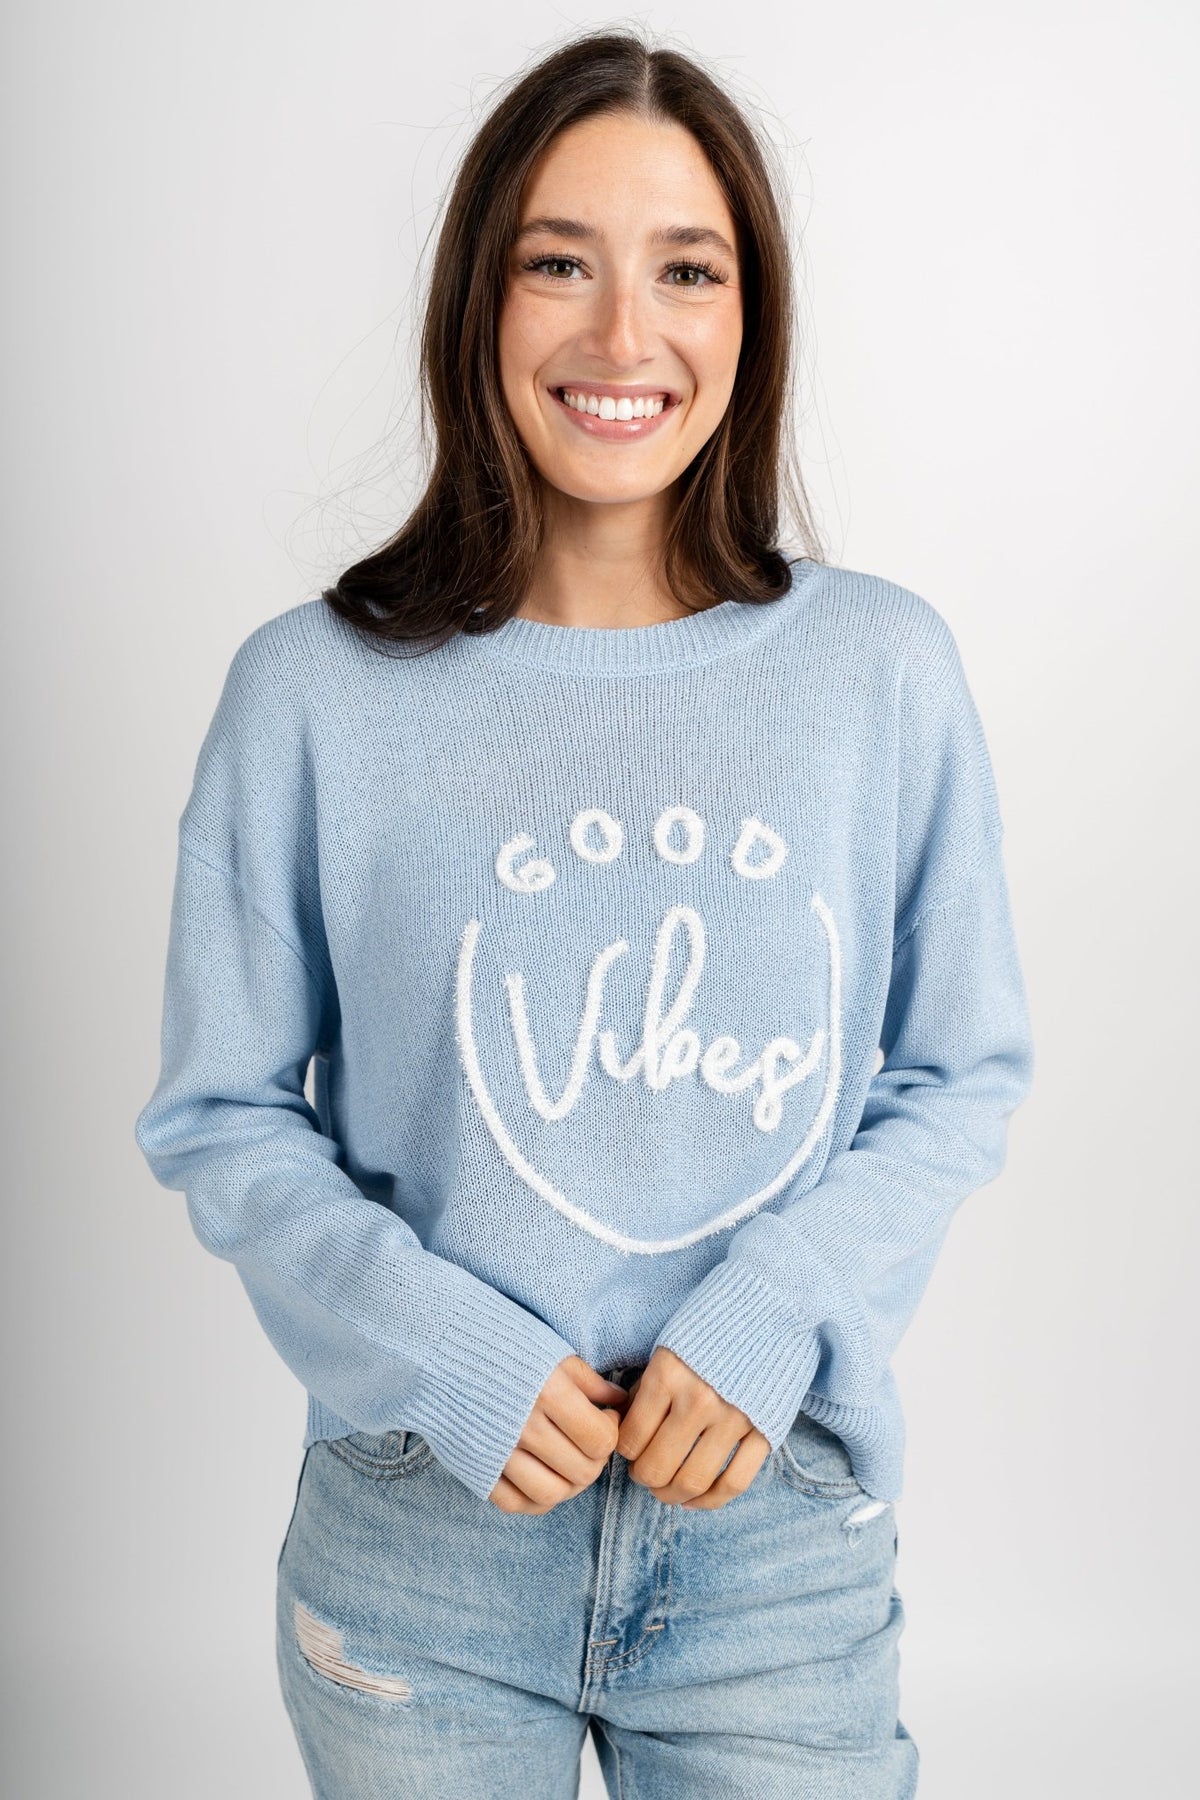 Good vibes tinsel sweater blue – Boutique Sweaters | Fashionable Sweaters at Lush Fashion Lounge Boutique in Oklahoma City